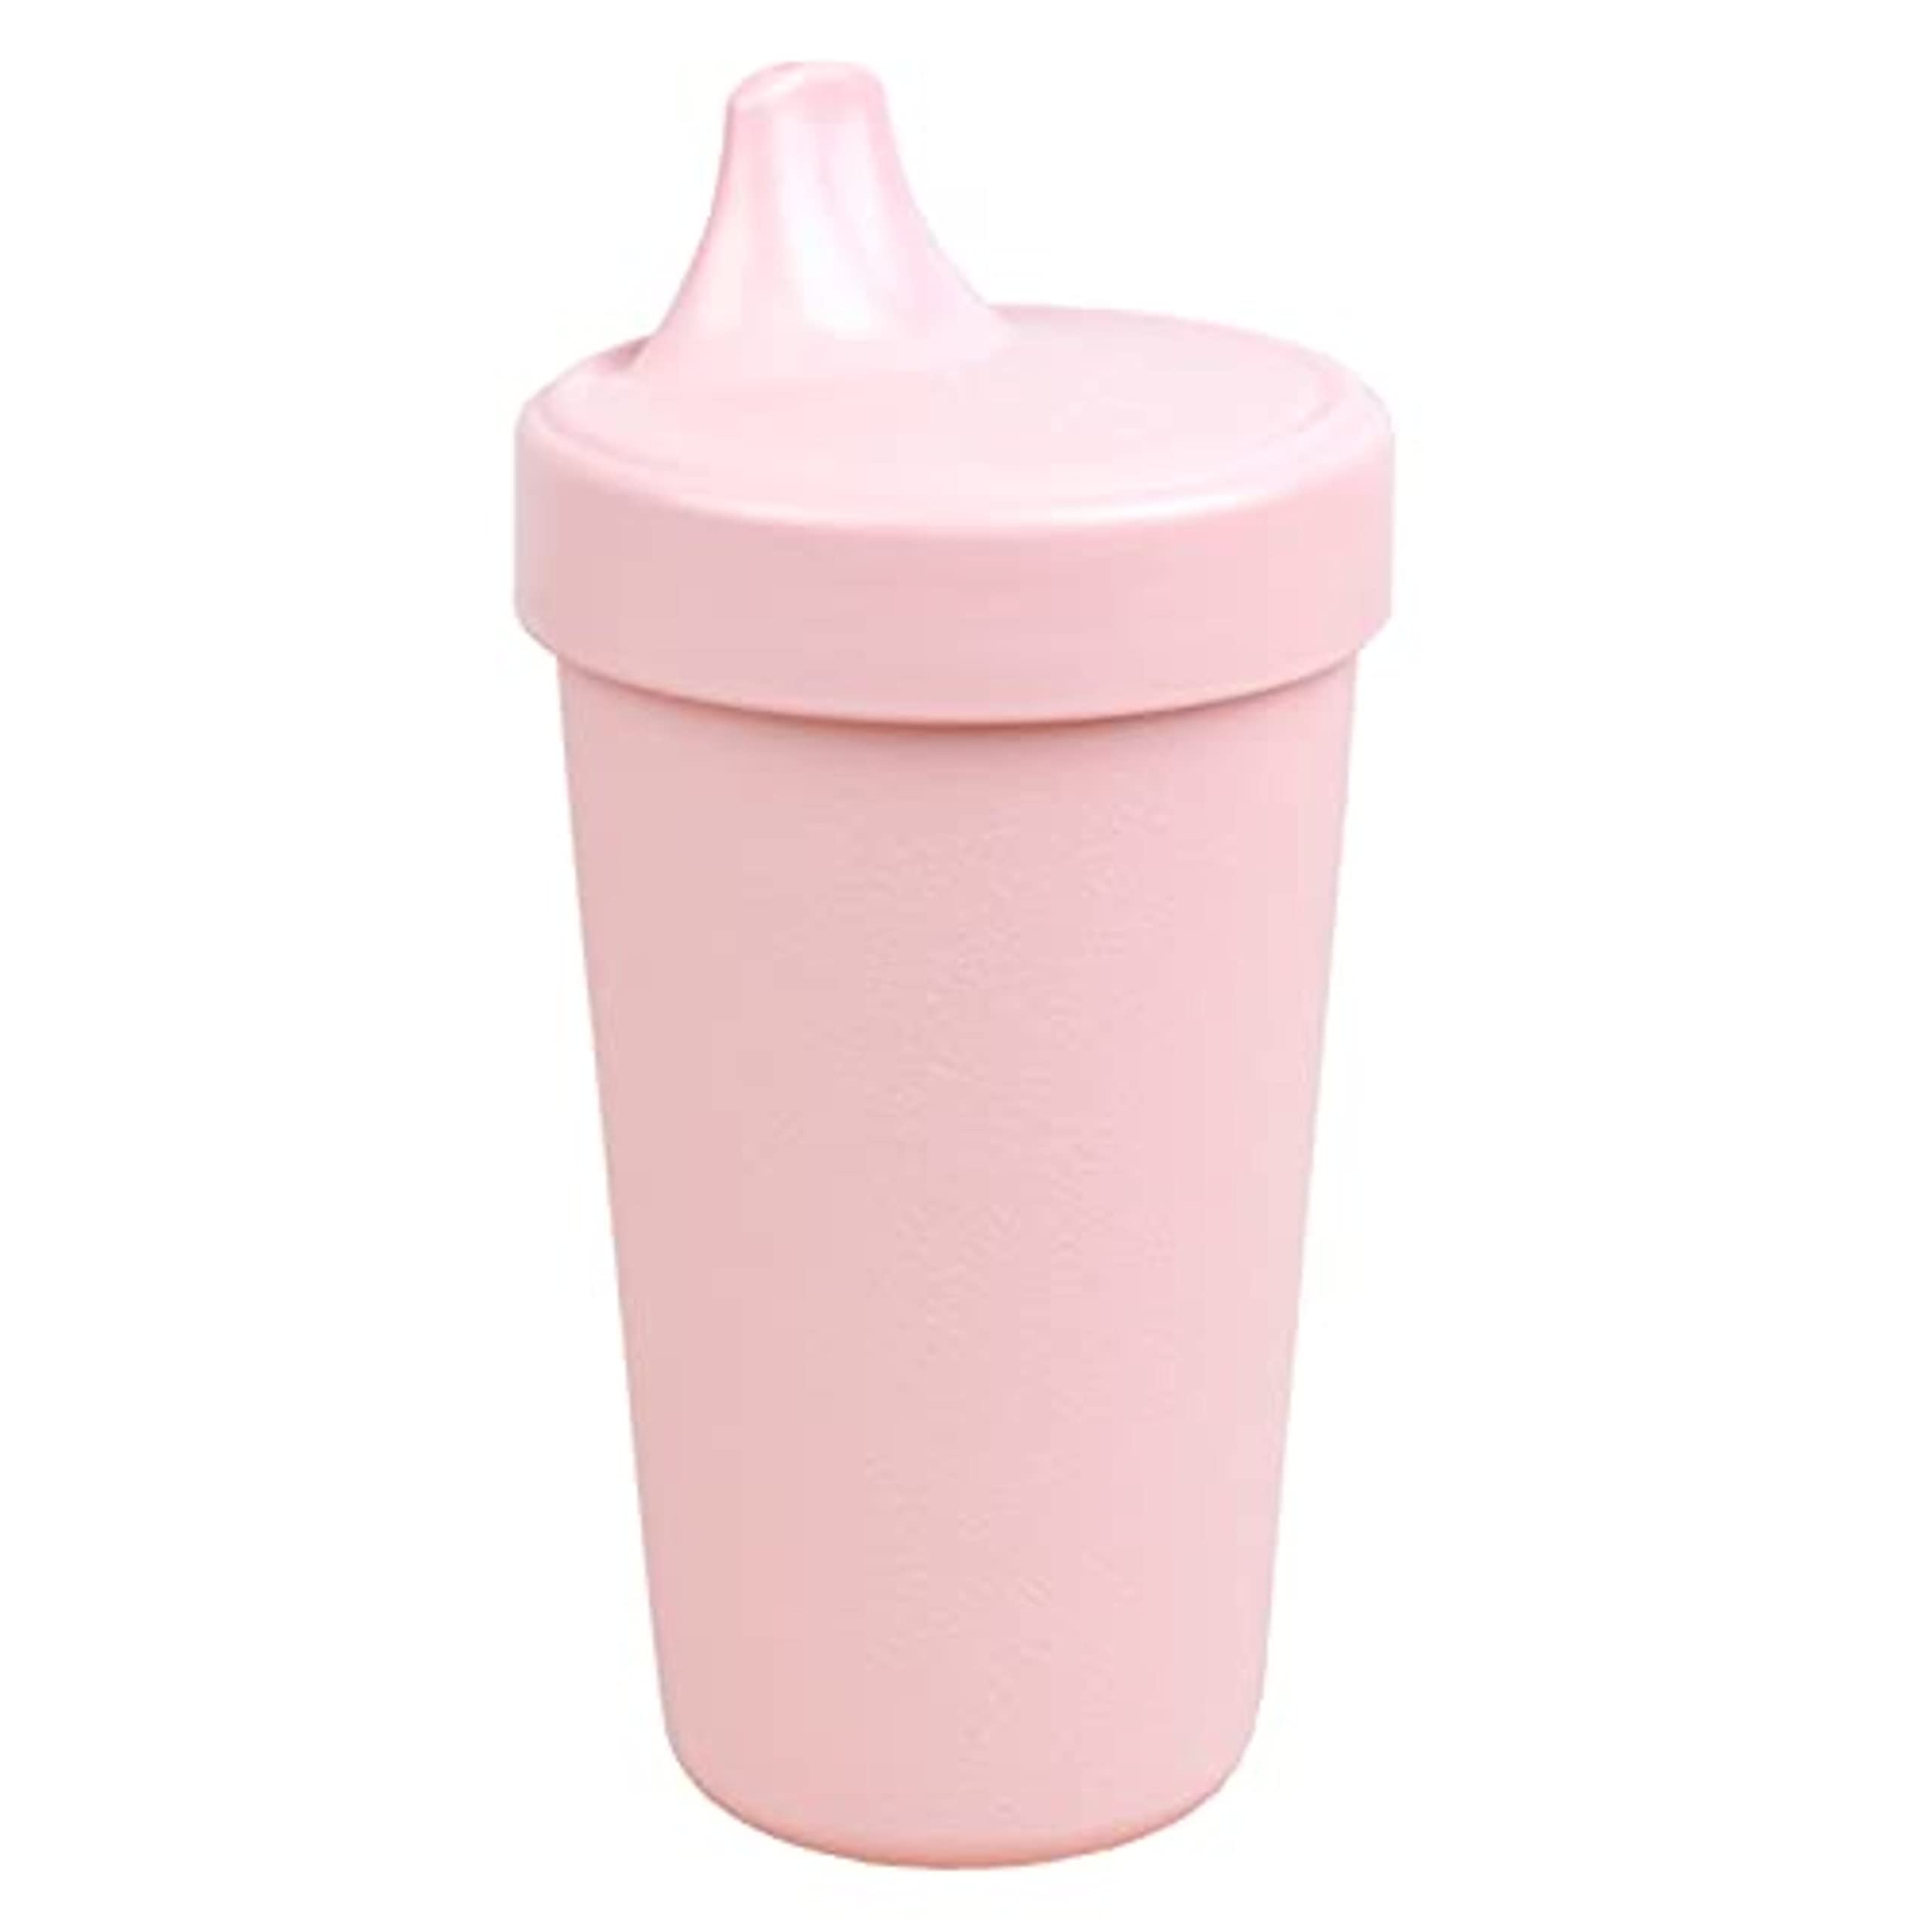 Re-Play No Spill Sippy Cup - Ice Blue